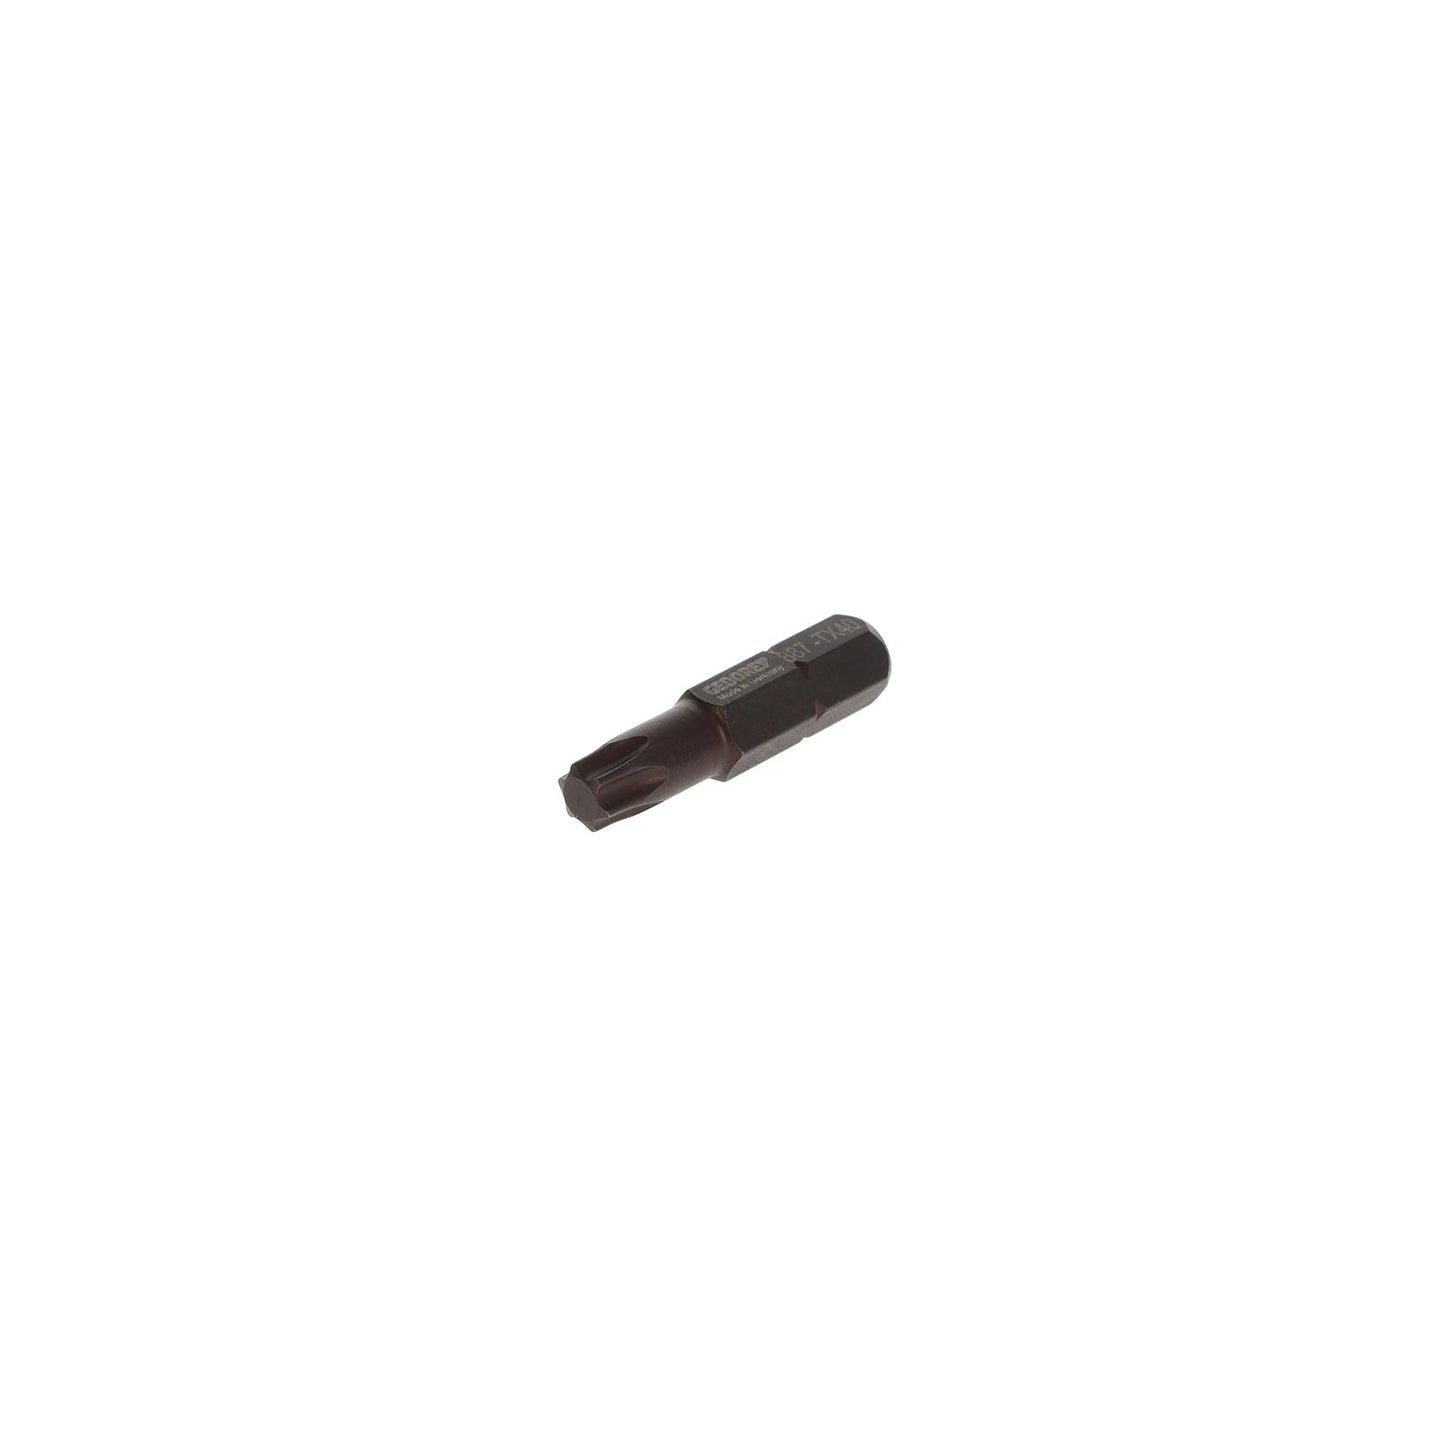 GEDORE 887 TX T40 - Embout TORX® 5/16", T40 (6571230)